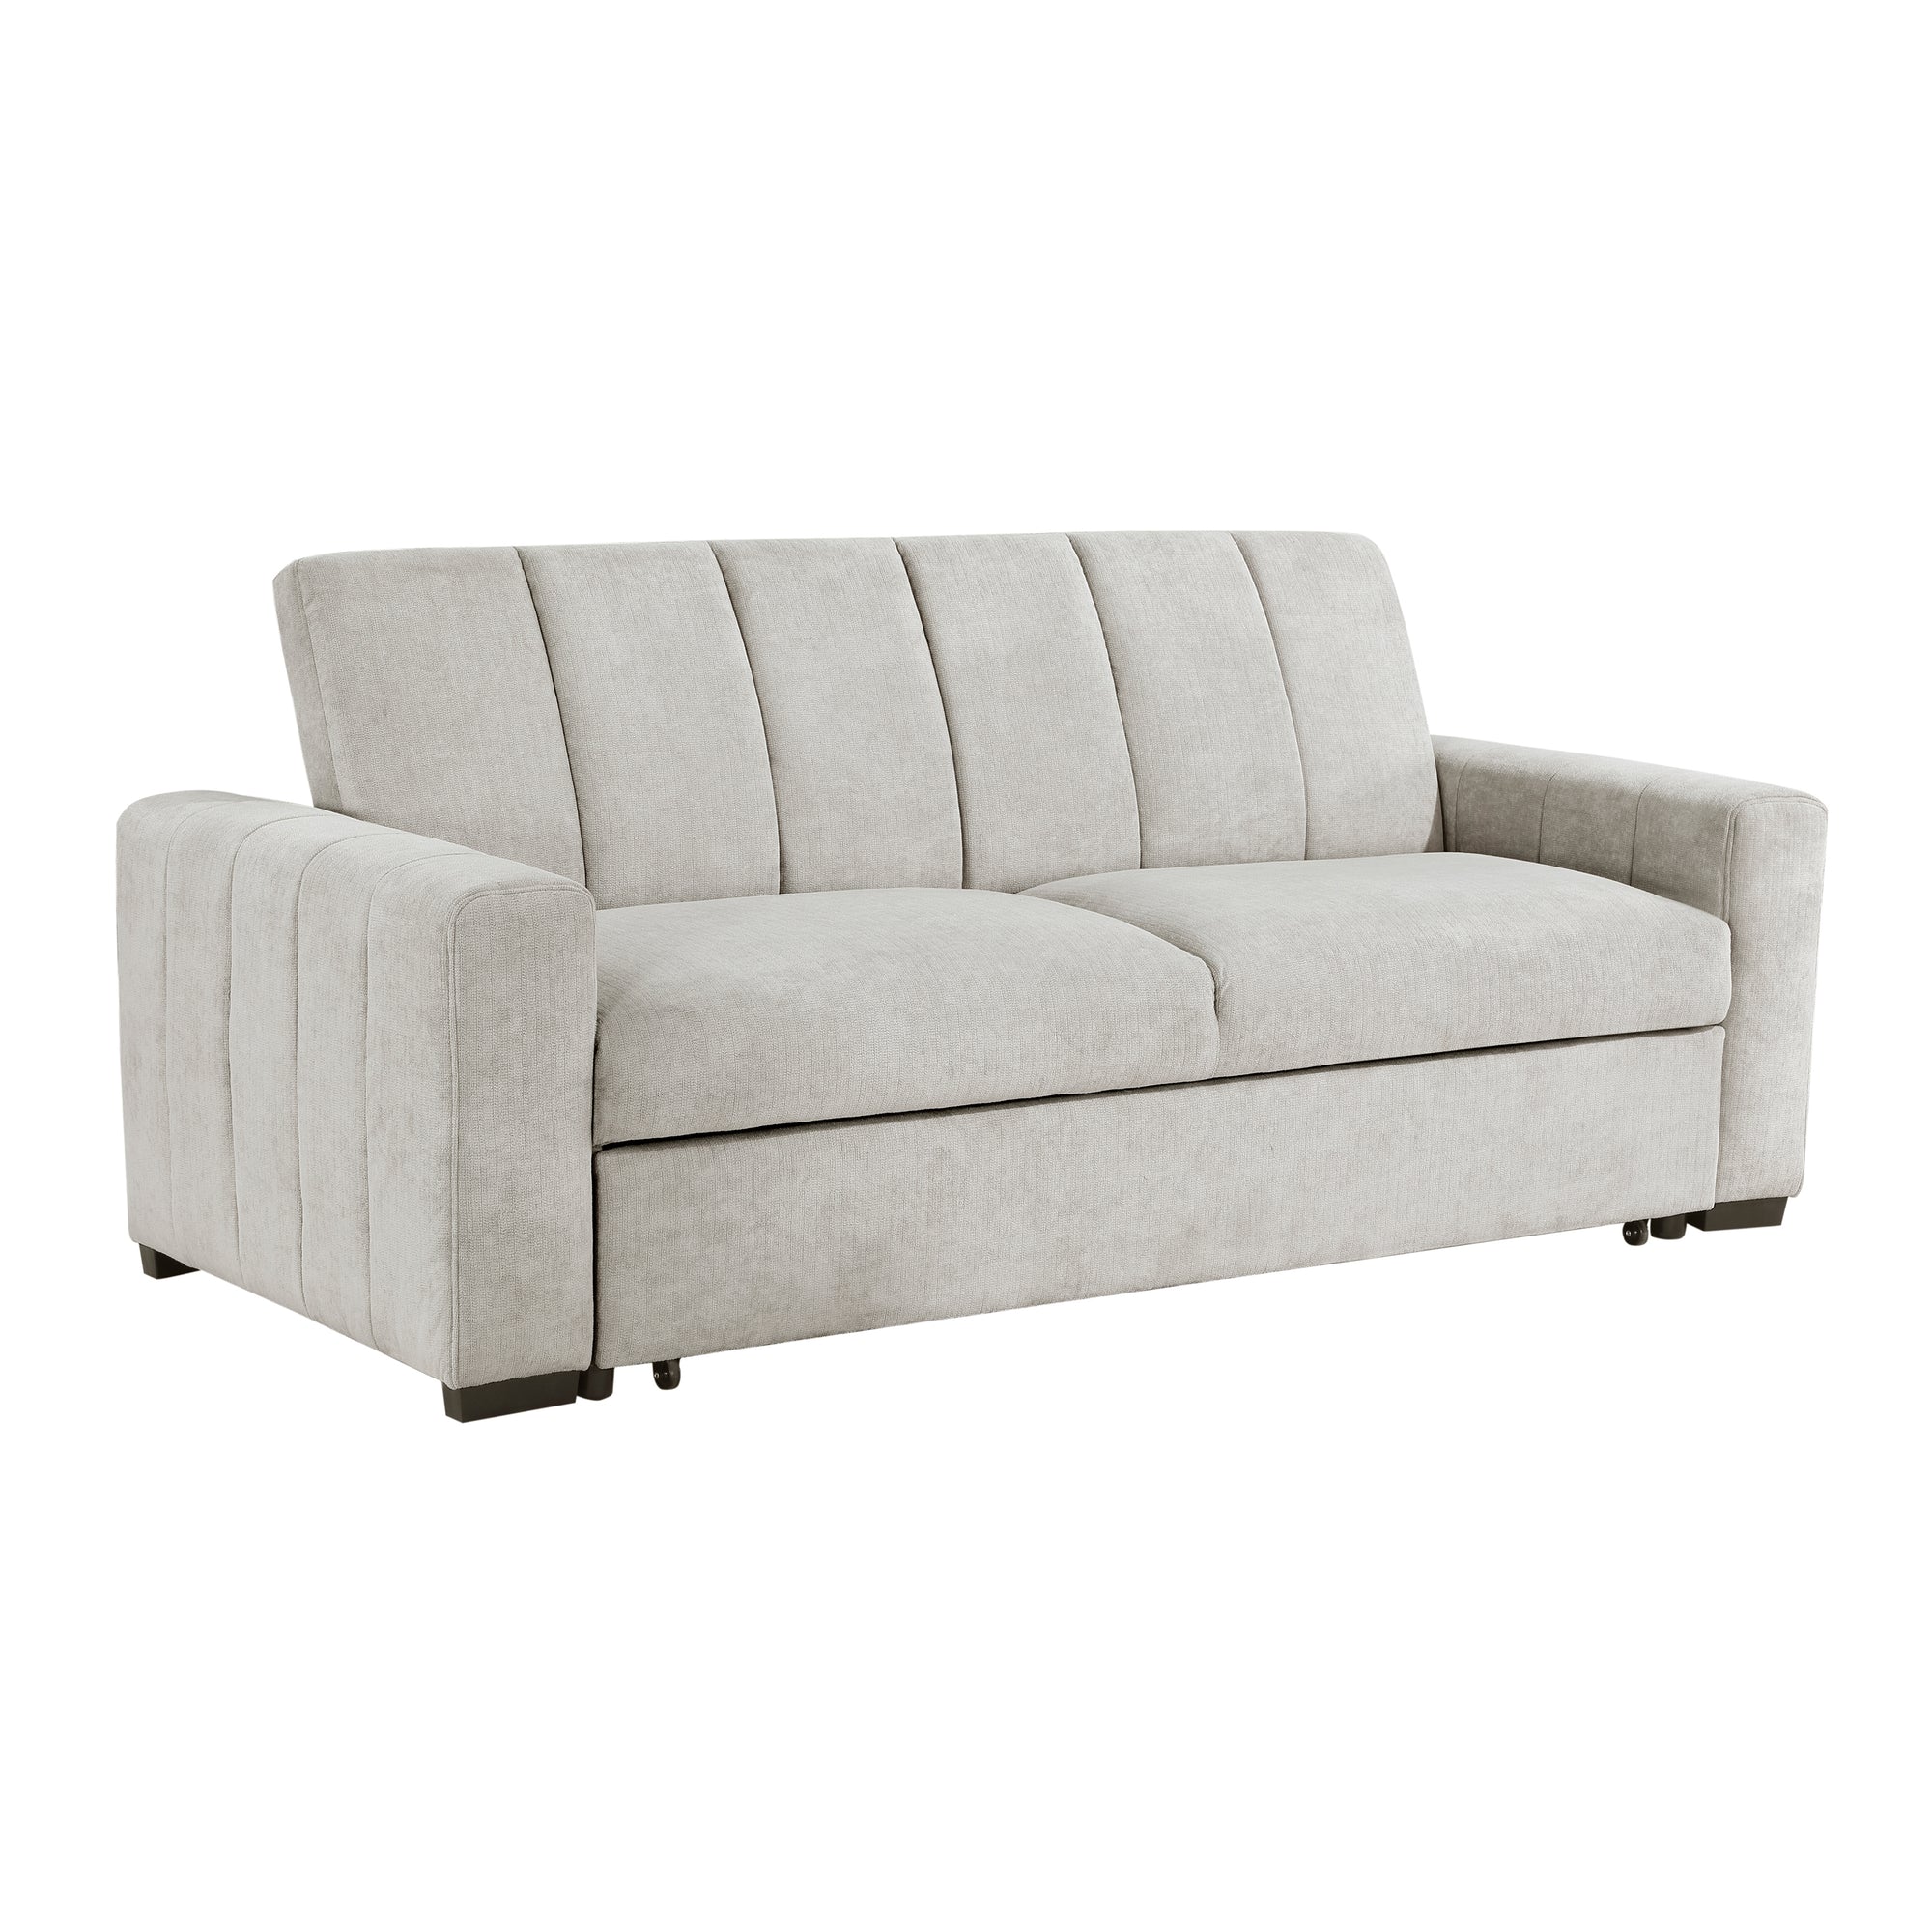 Crestview Textured Fabric Convertible Sofa with Pull-out Bed